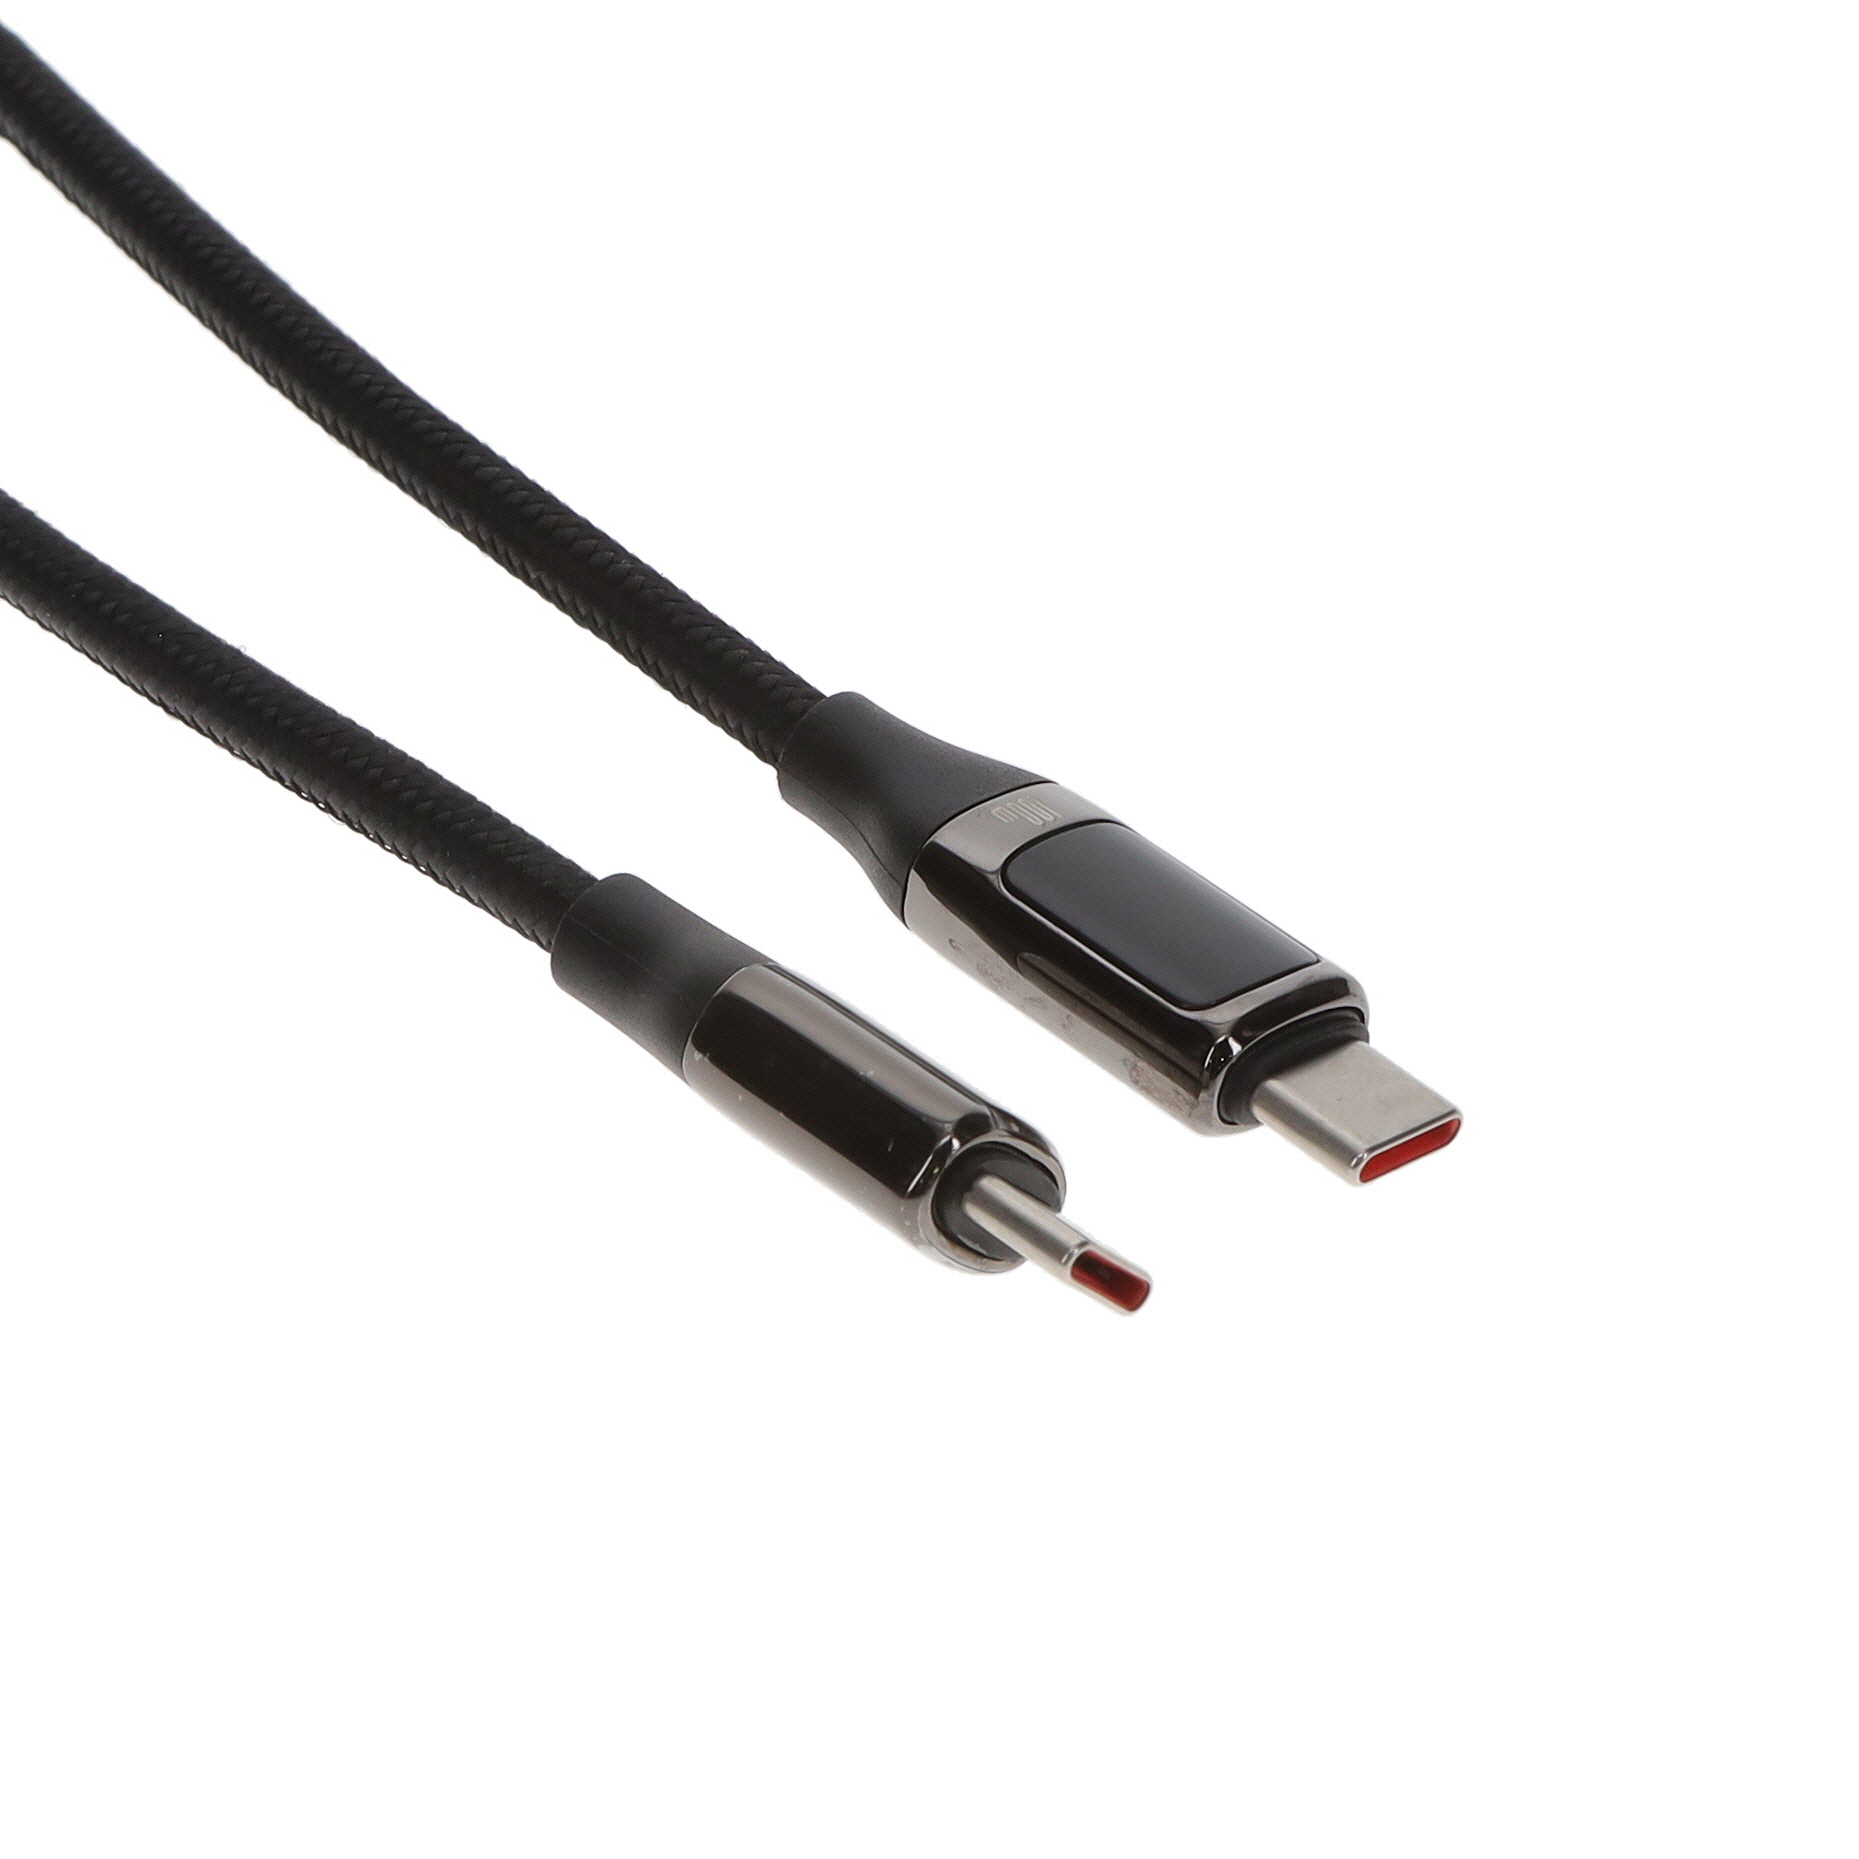 【CAB-21275】FAST CHARGING USB C TO C CABLE W